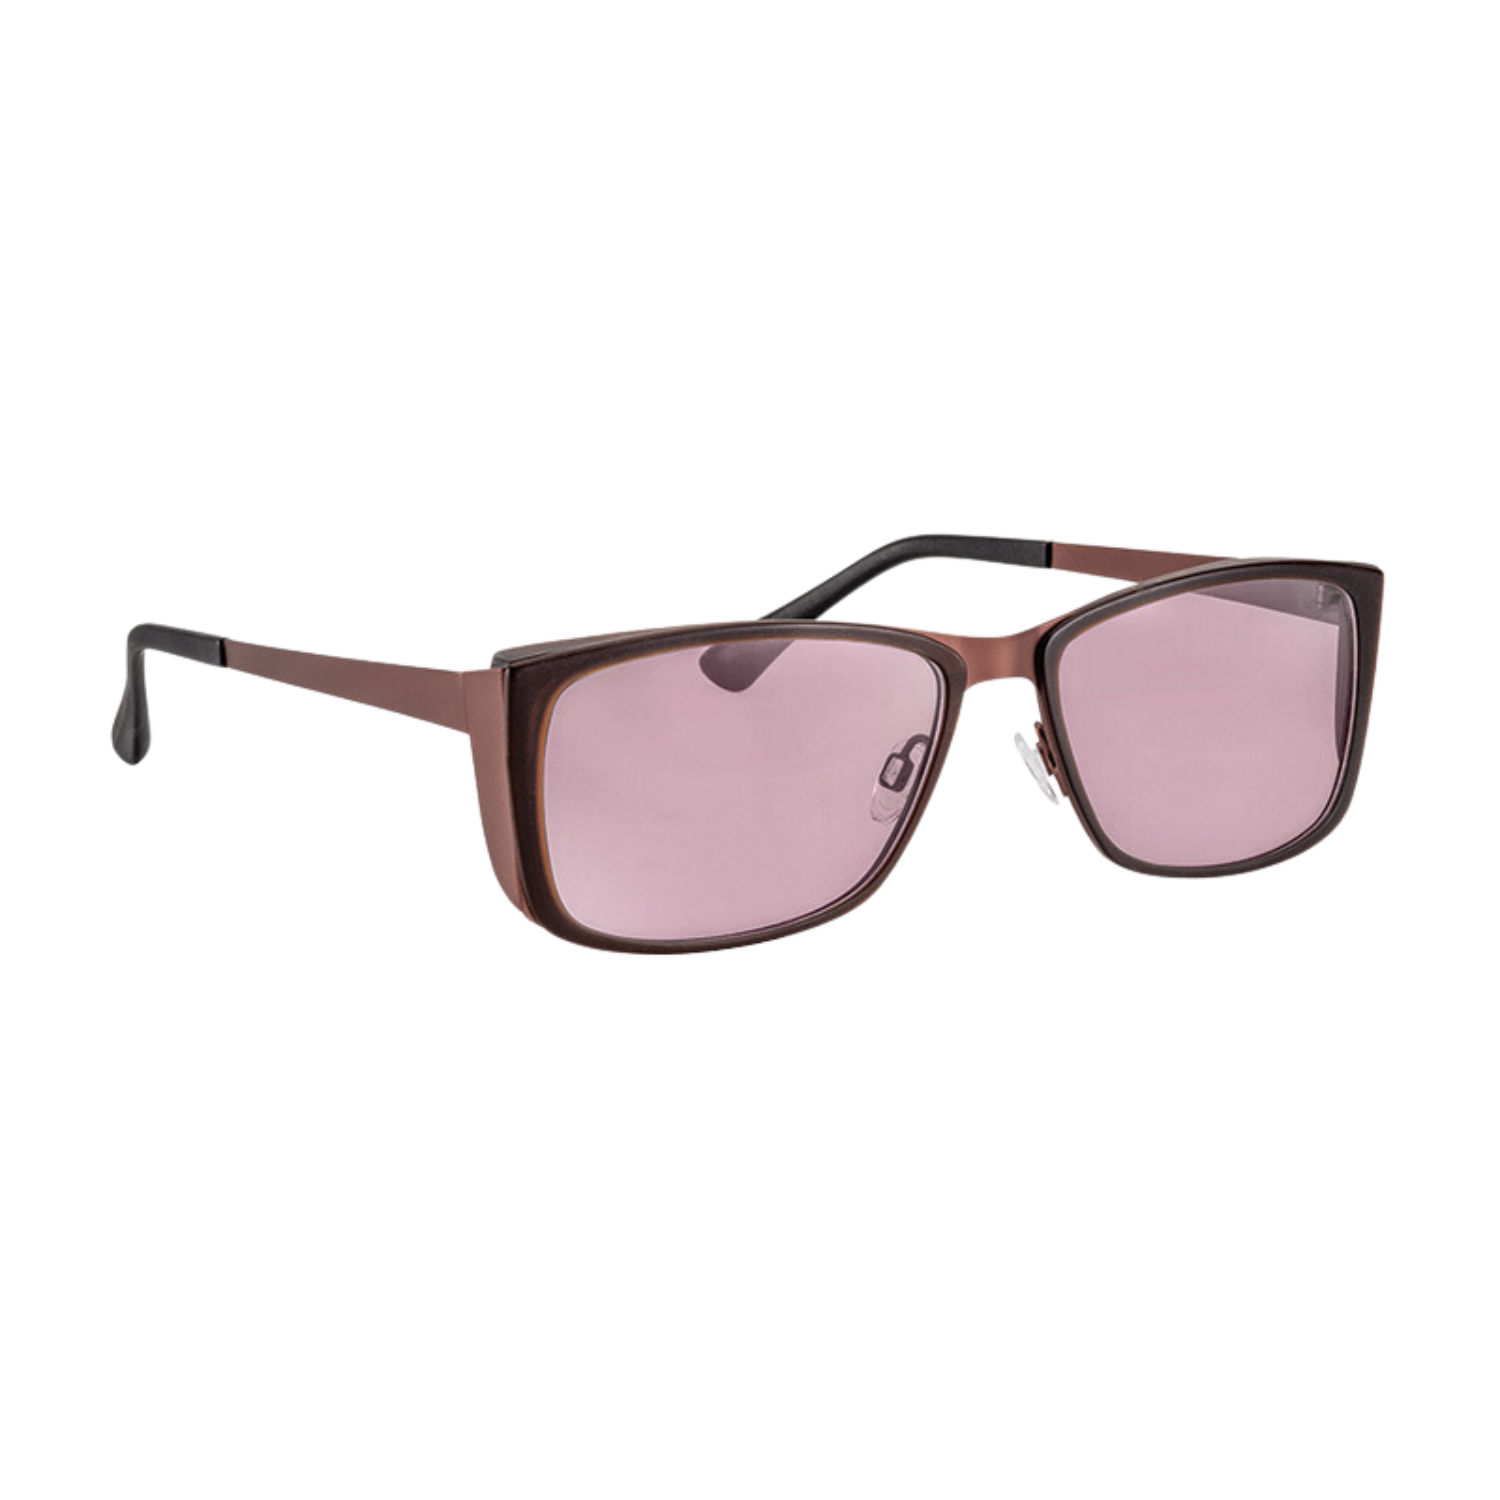 Image of the Acunis FL-41 Light Sensitivity Glasses with Brown Stainless Steel Frames and 25% light absorption.